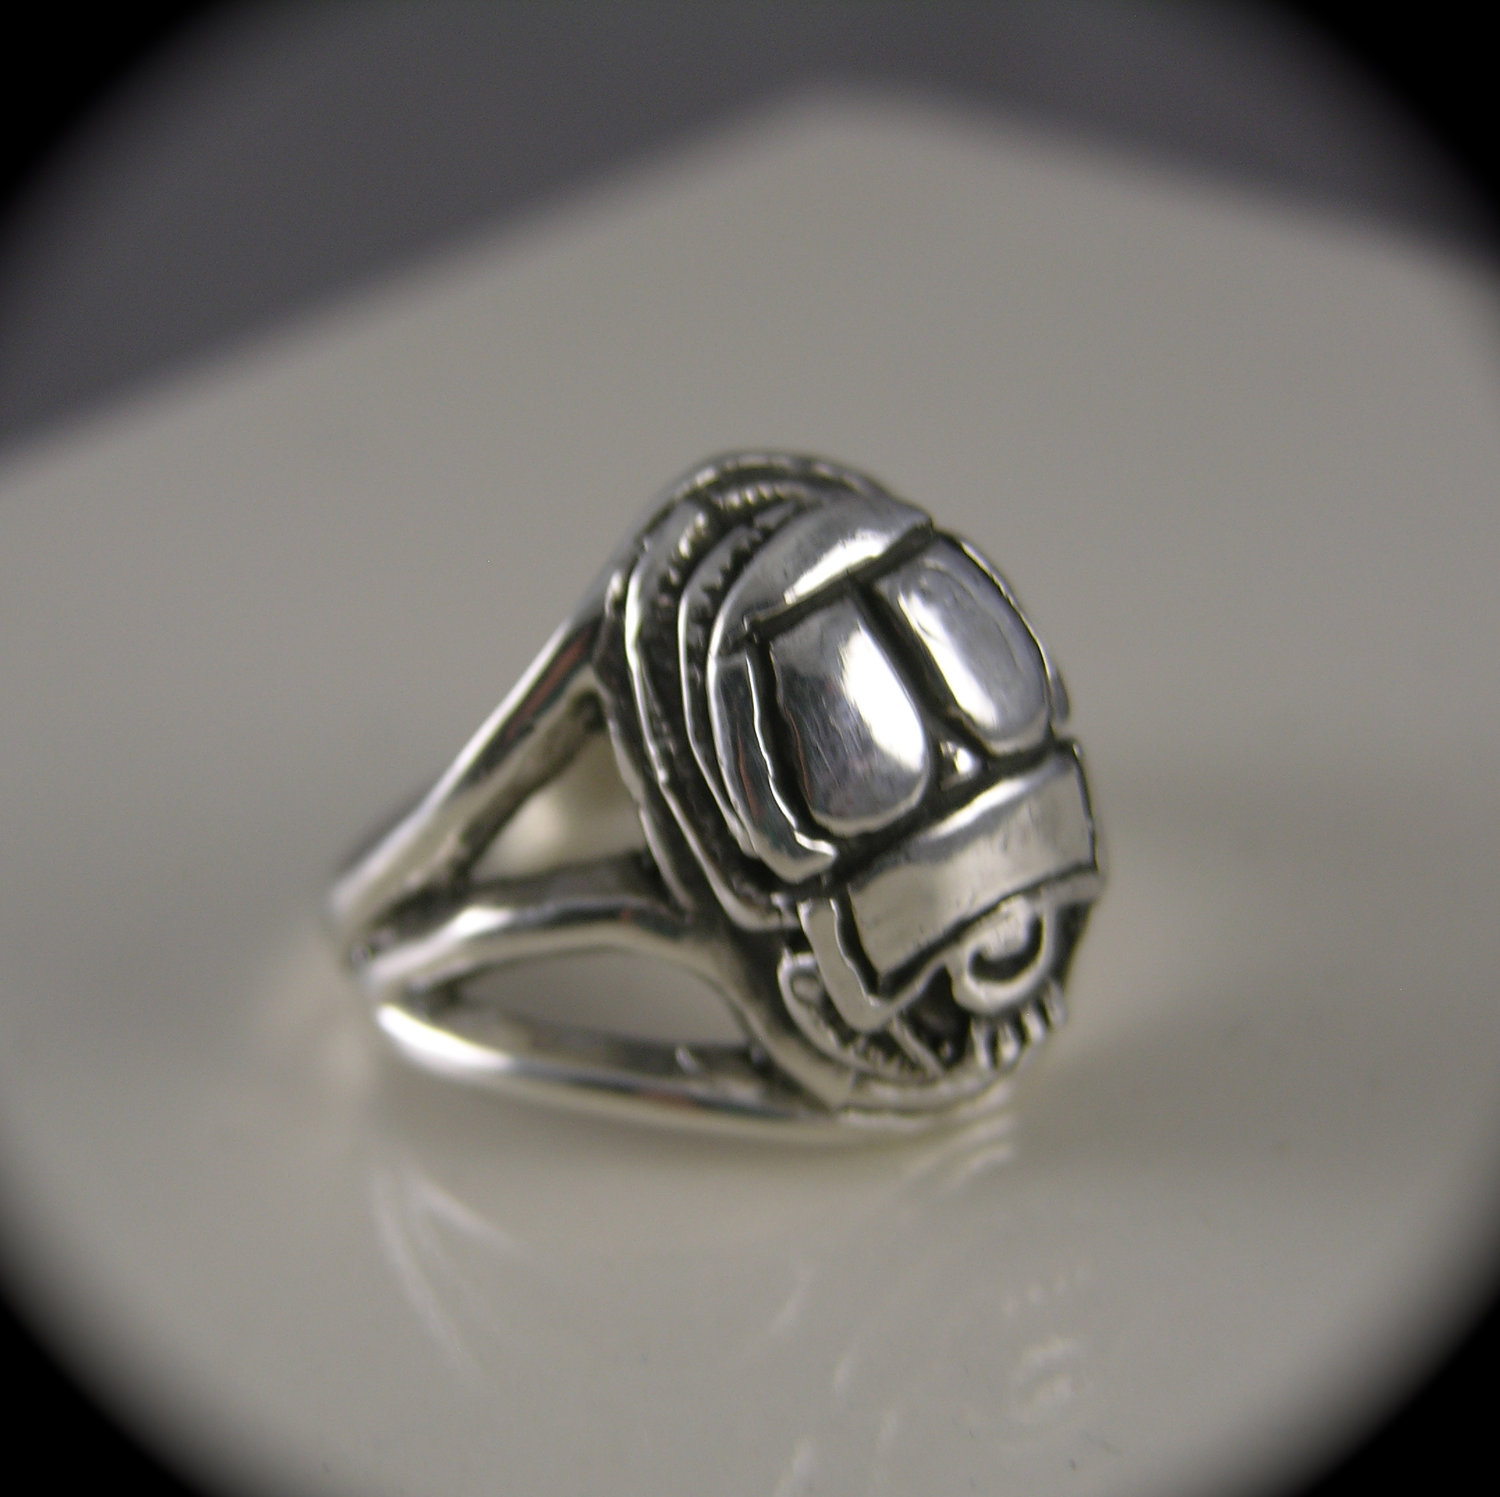 Scarab Beetle Ring in Oxidized Silver - Shibumi Gallery